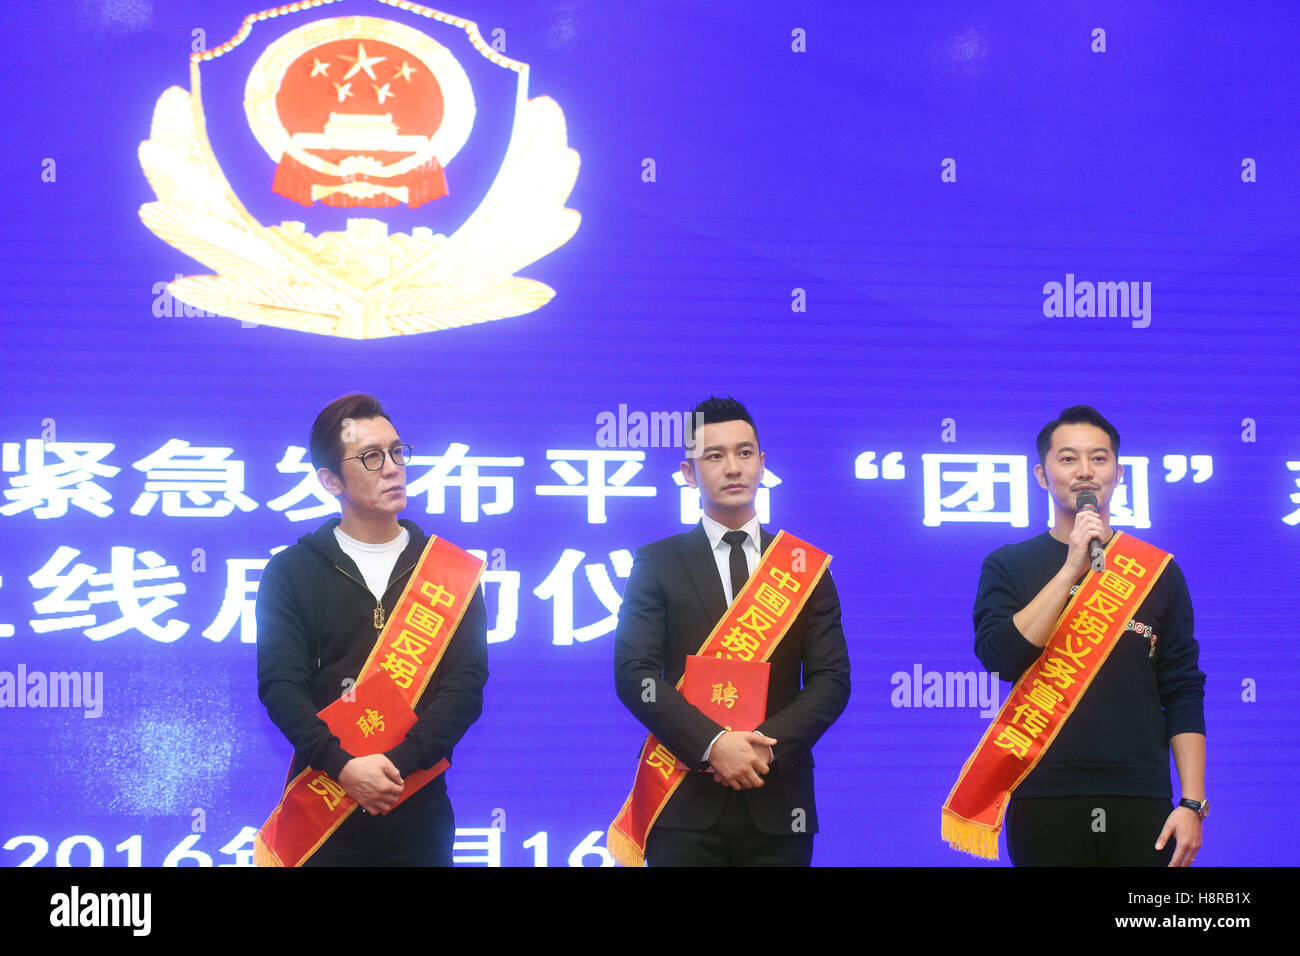 Beijing, China. 16th Nov, 2016. Anti-trafficking propagators Huang Xiaoming (C), Li Yong (L) and Sha Yi attend a launching ceremony of the new version of 'Tuanyuan', an app where police release information on missing children, in Beijing, capital of China, Nov. 16, 2016. The Ministry of Public Security (MPS) announced Wednesday that in the last six months 260 missing children had been found thanks to the mobile app. The new version will expand its reach through cooperation with other popular mobile apps. © Jin Liangkuai/Xinhua/Alamy Live News Stock Photo